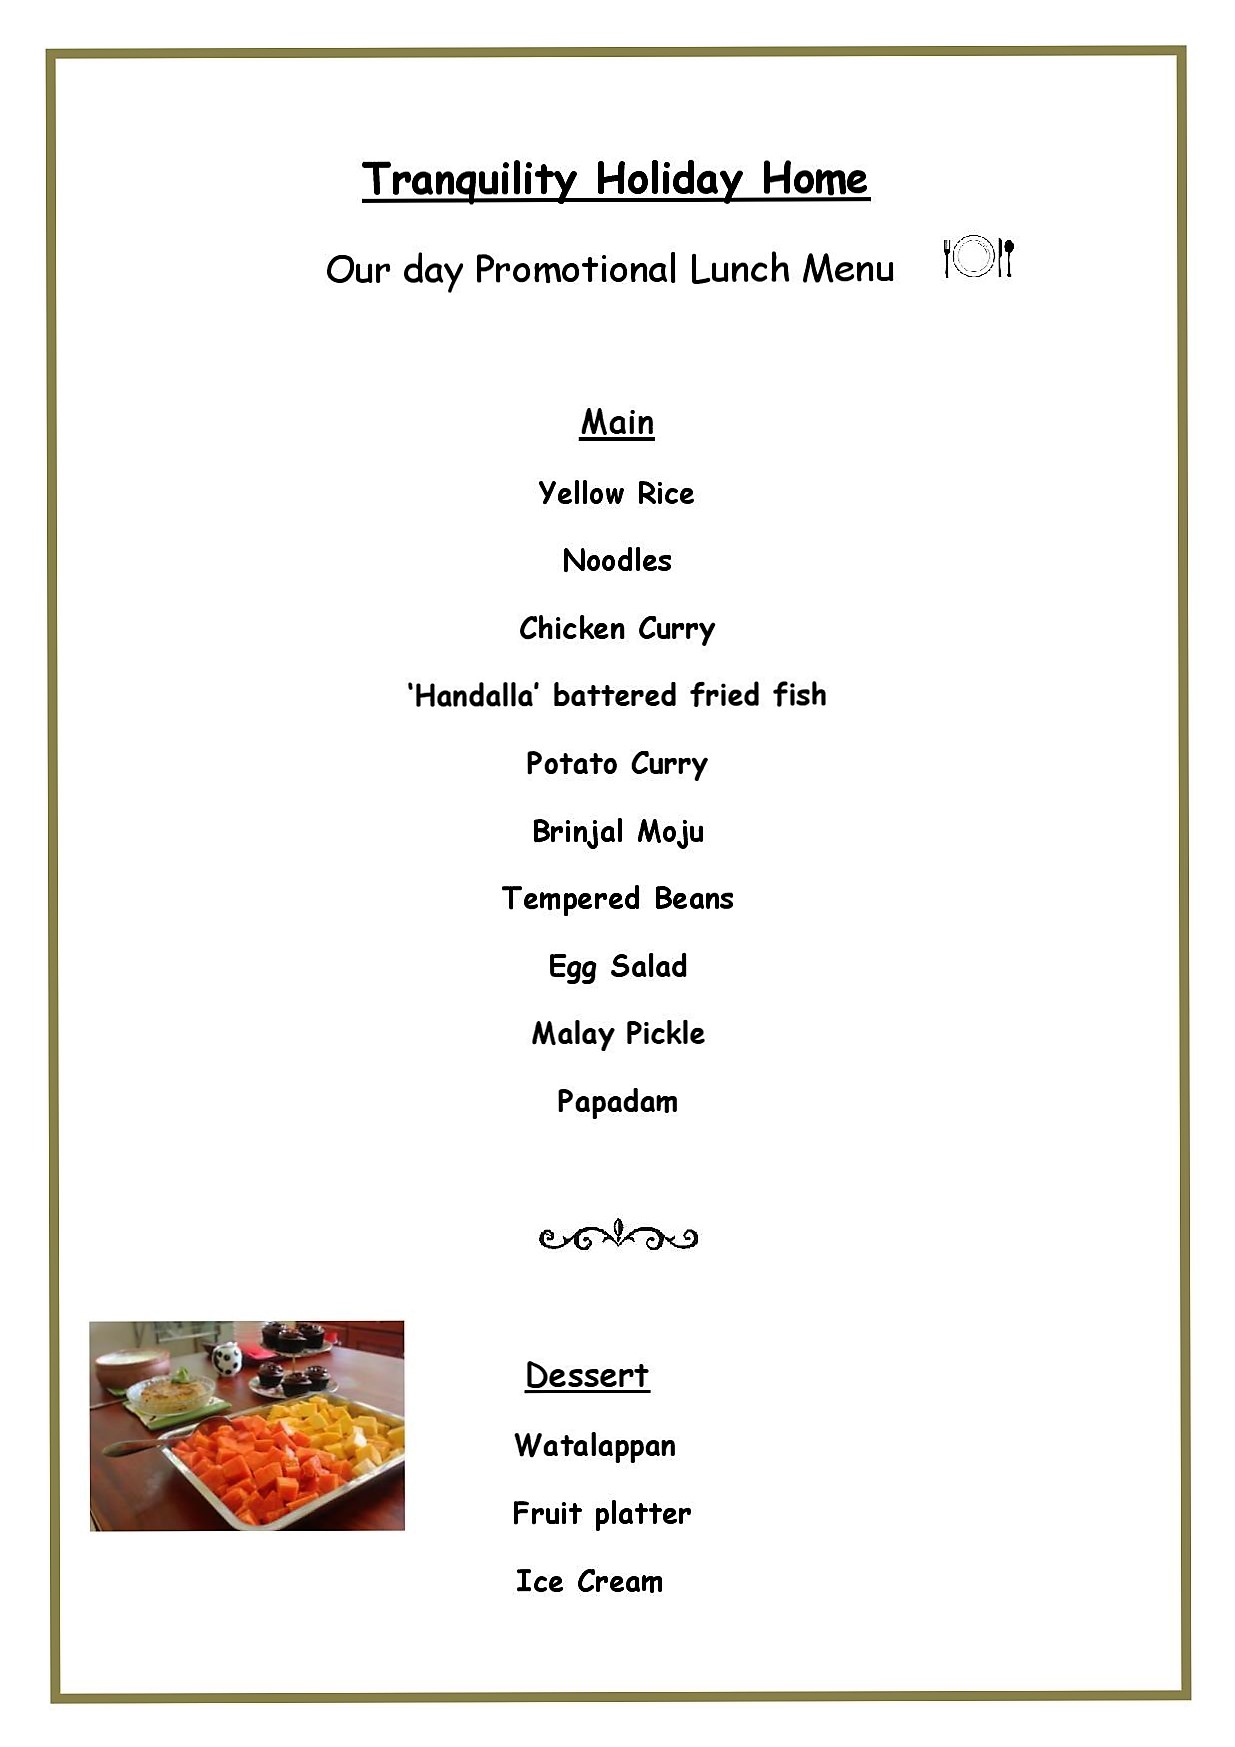 Our day Promotional Lunch Menu